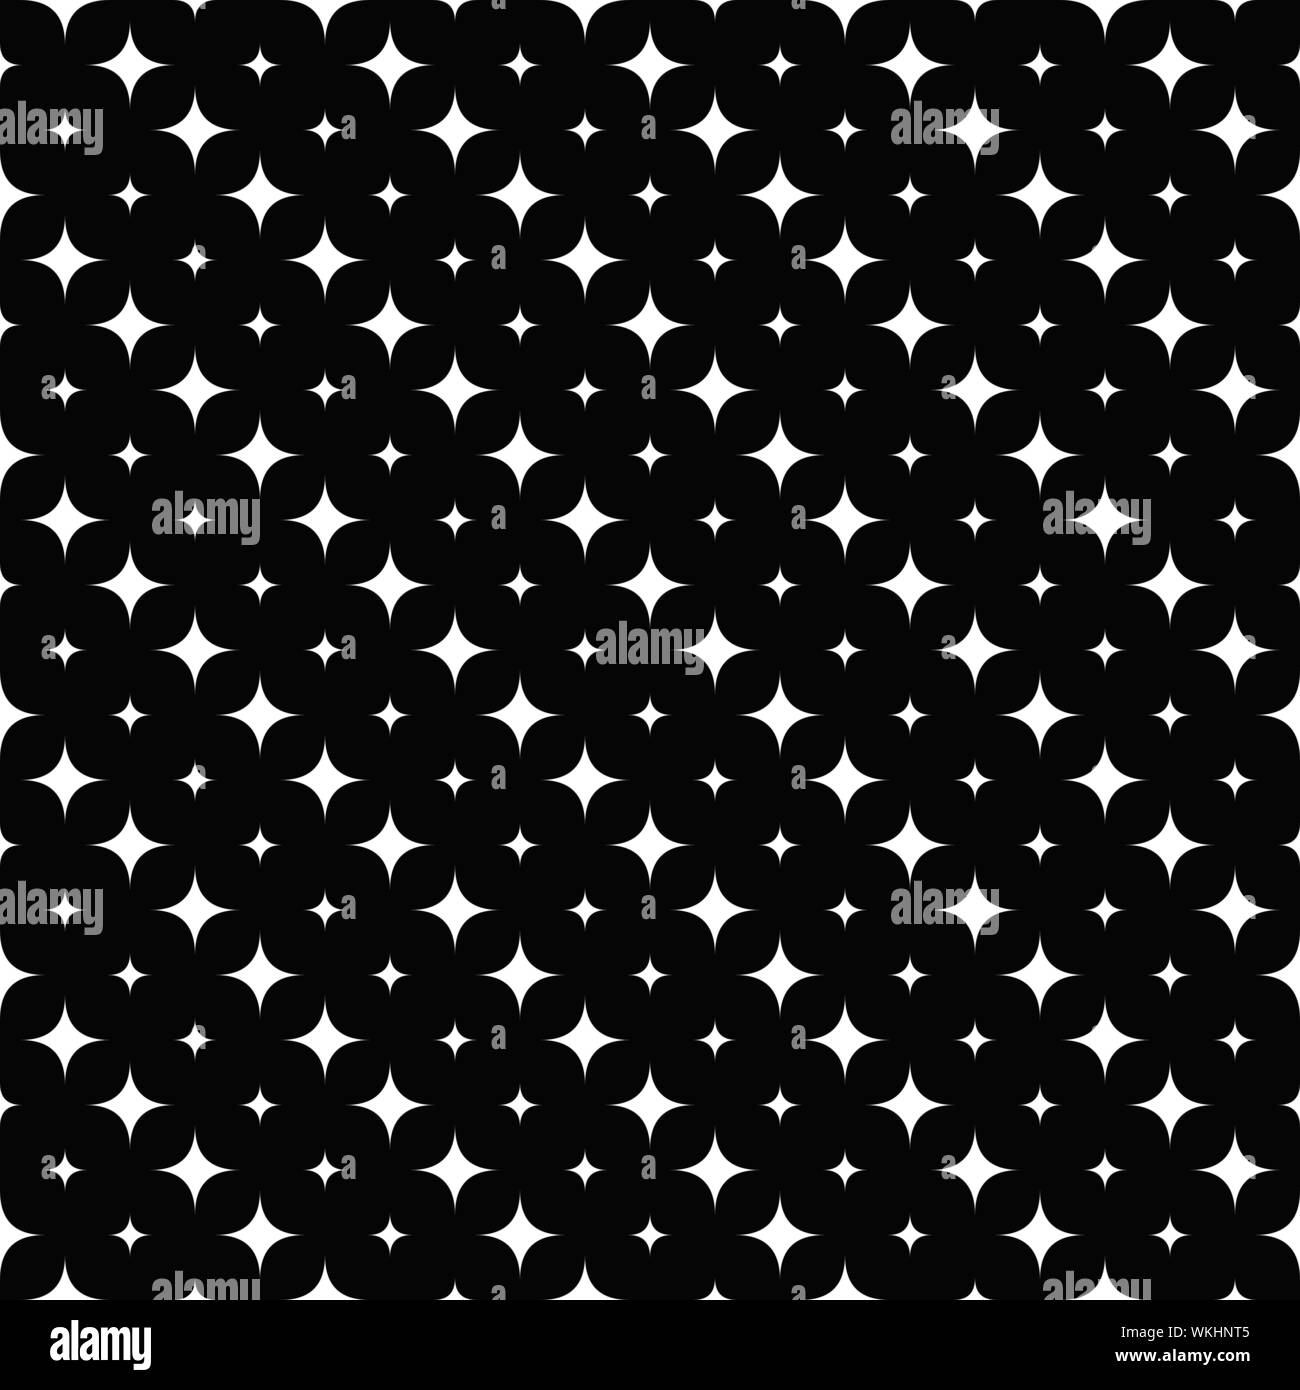 Geometrical curved star pattern background design - abstract vector illustration Stock Vector